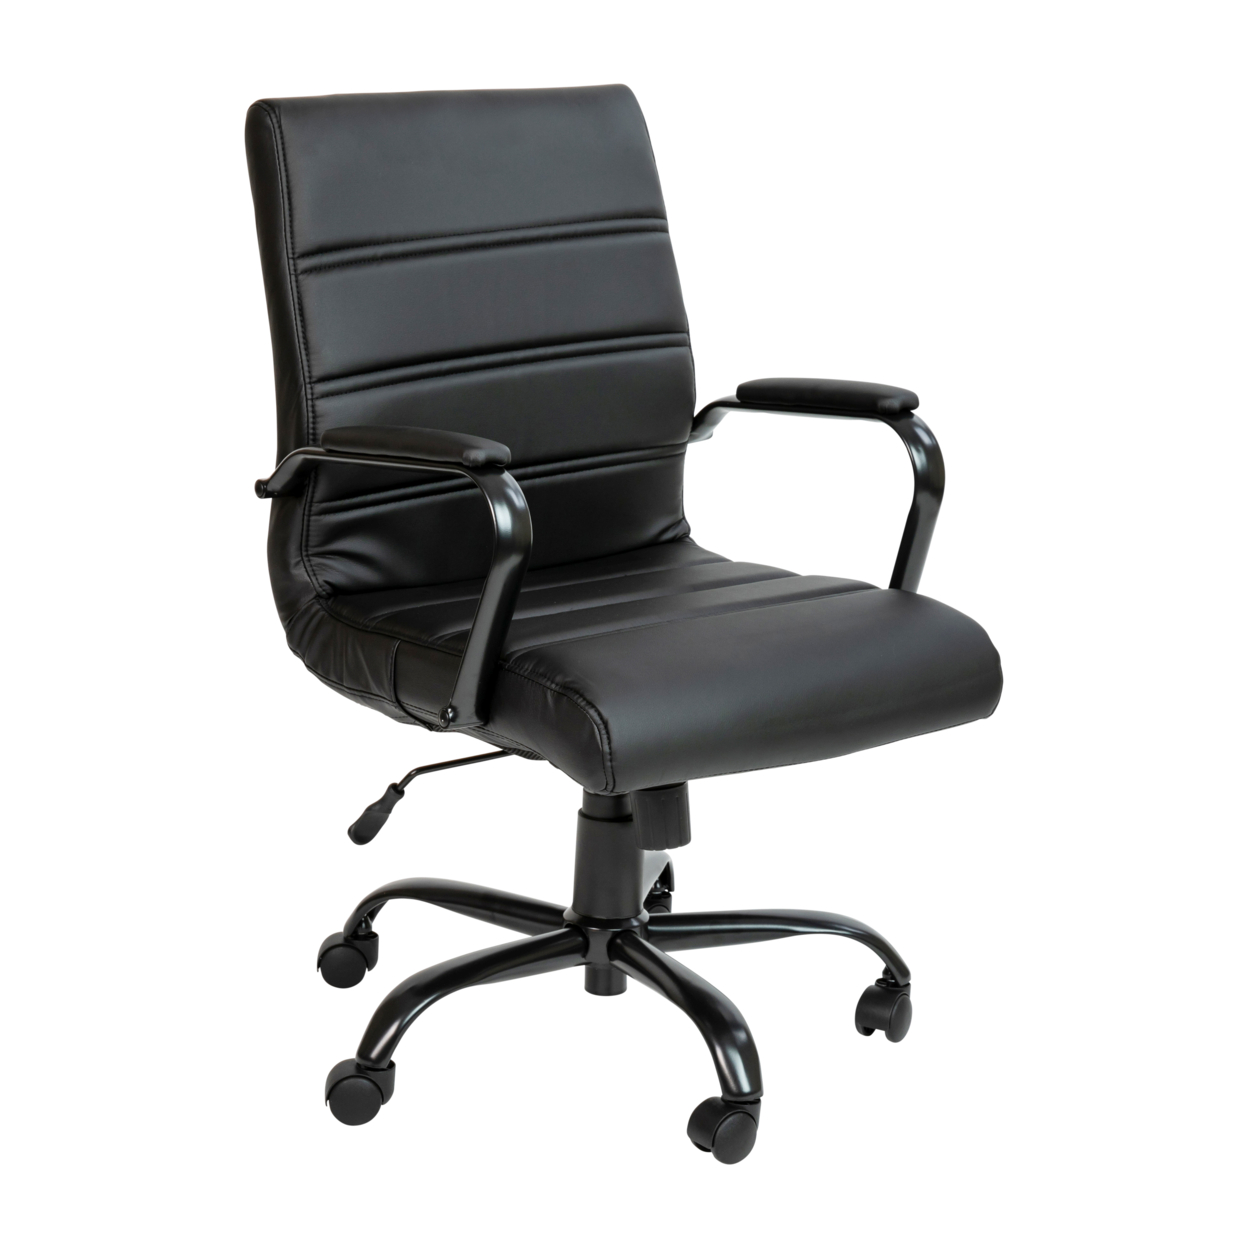 Mid-Back Black LeatherSoft Executive Swivel Office Chair With Black Frame And Arms